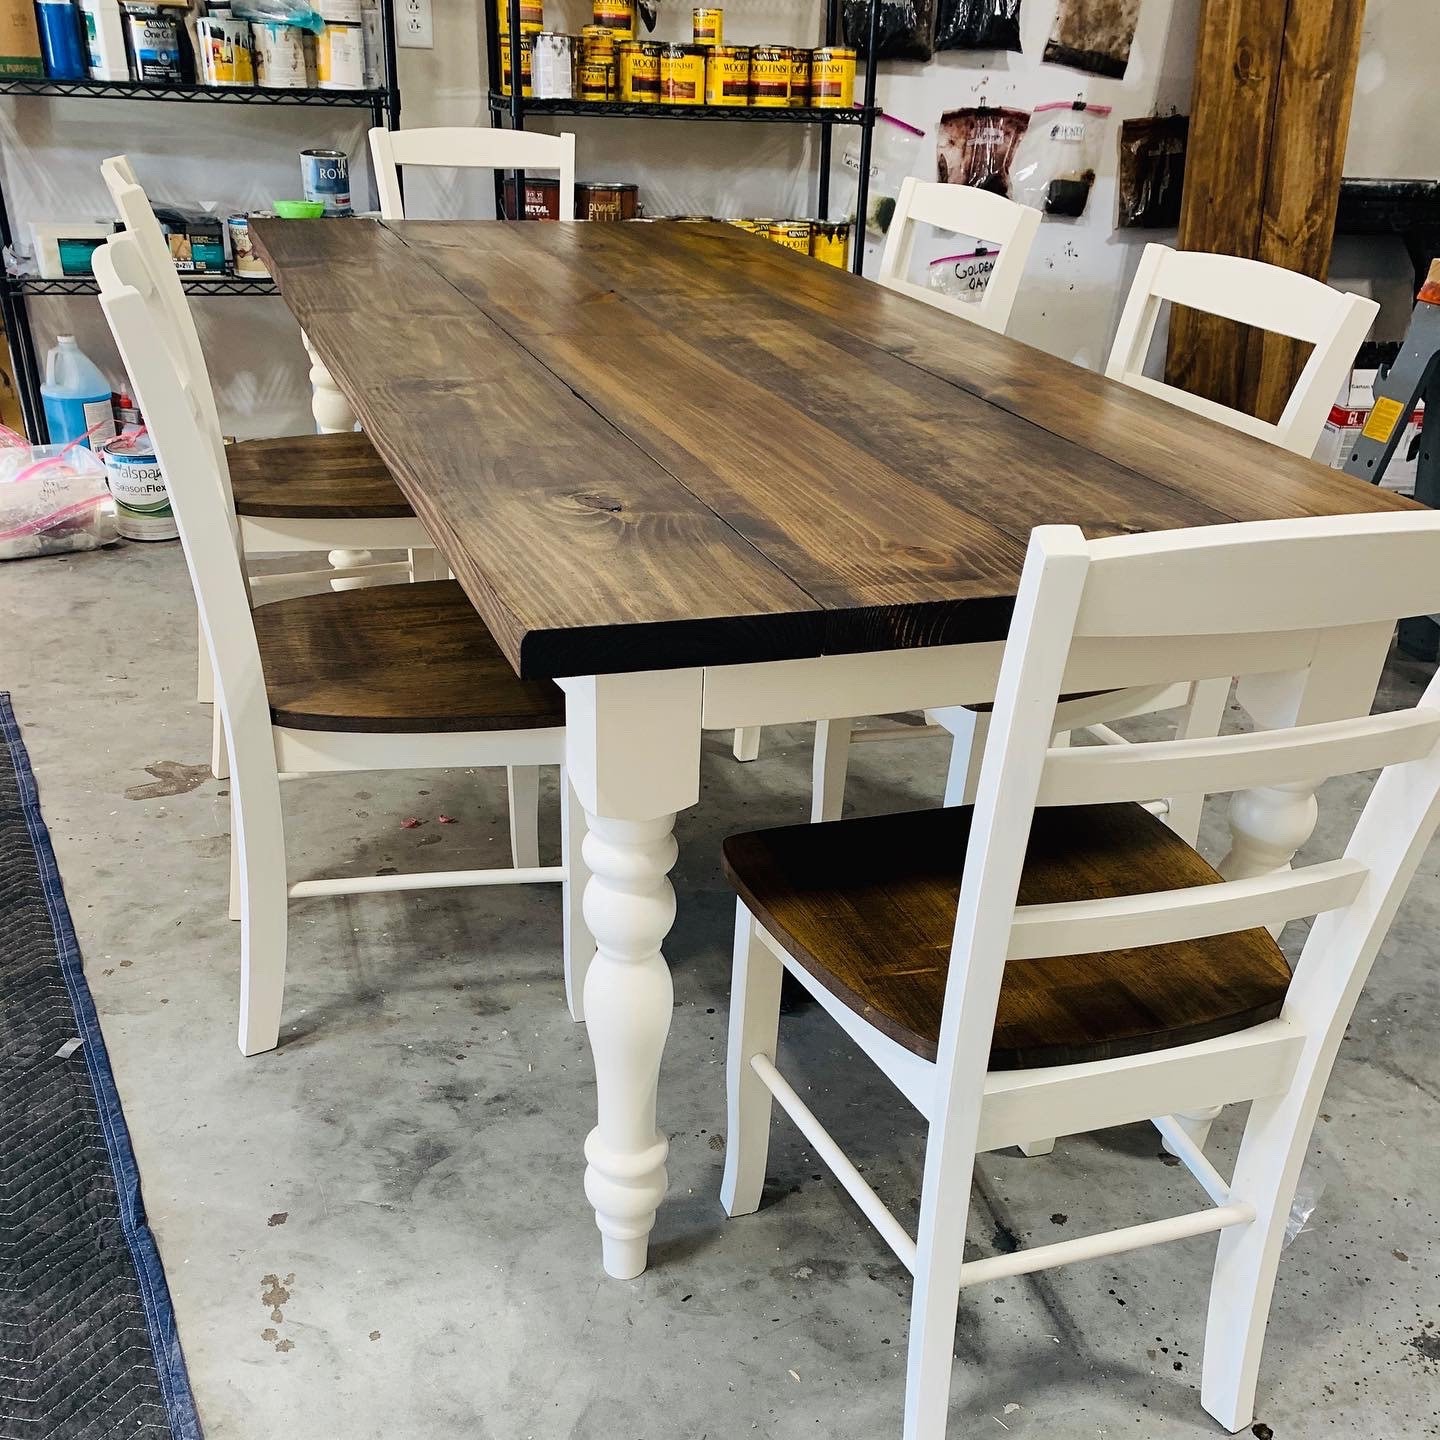 7ft Rustic Farmhouse Table with Chairs and Turned Legs 